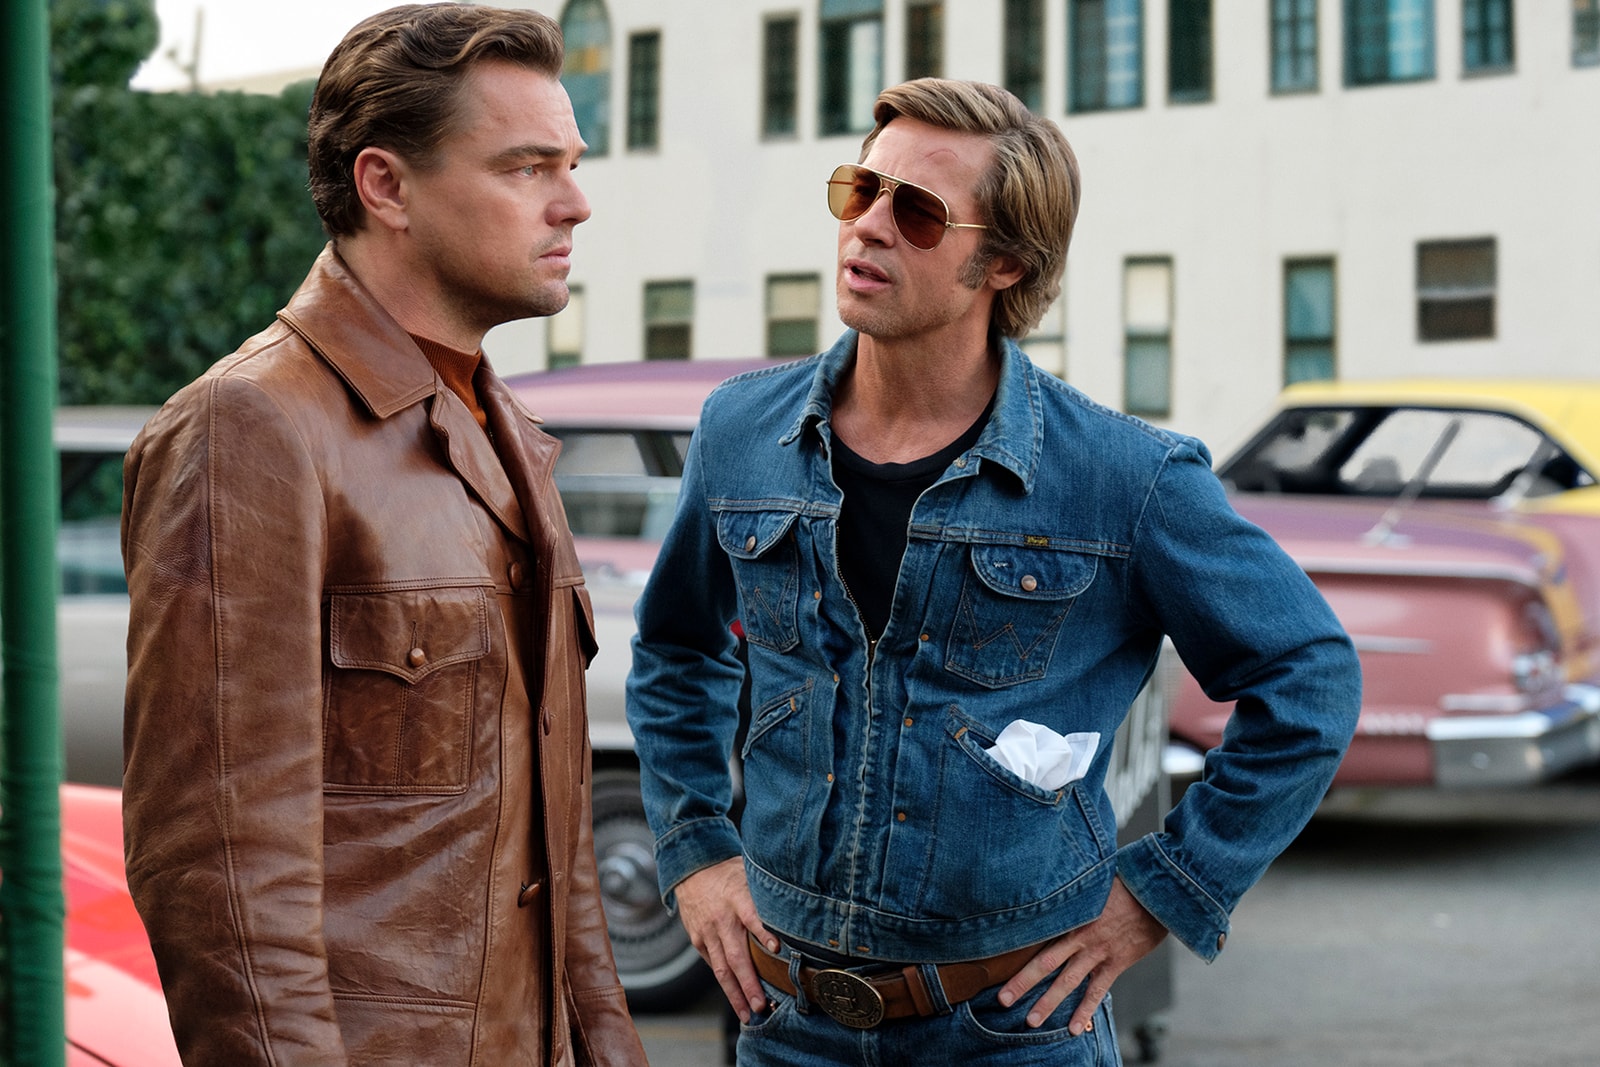 quentin tarantino once upon a time in hollywood best outfits looks margot robbie leonardo dicaprio brad pitt '60s fashion 1960s style vintage sharon tate rick dalton cliff booth